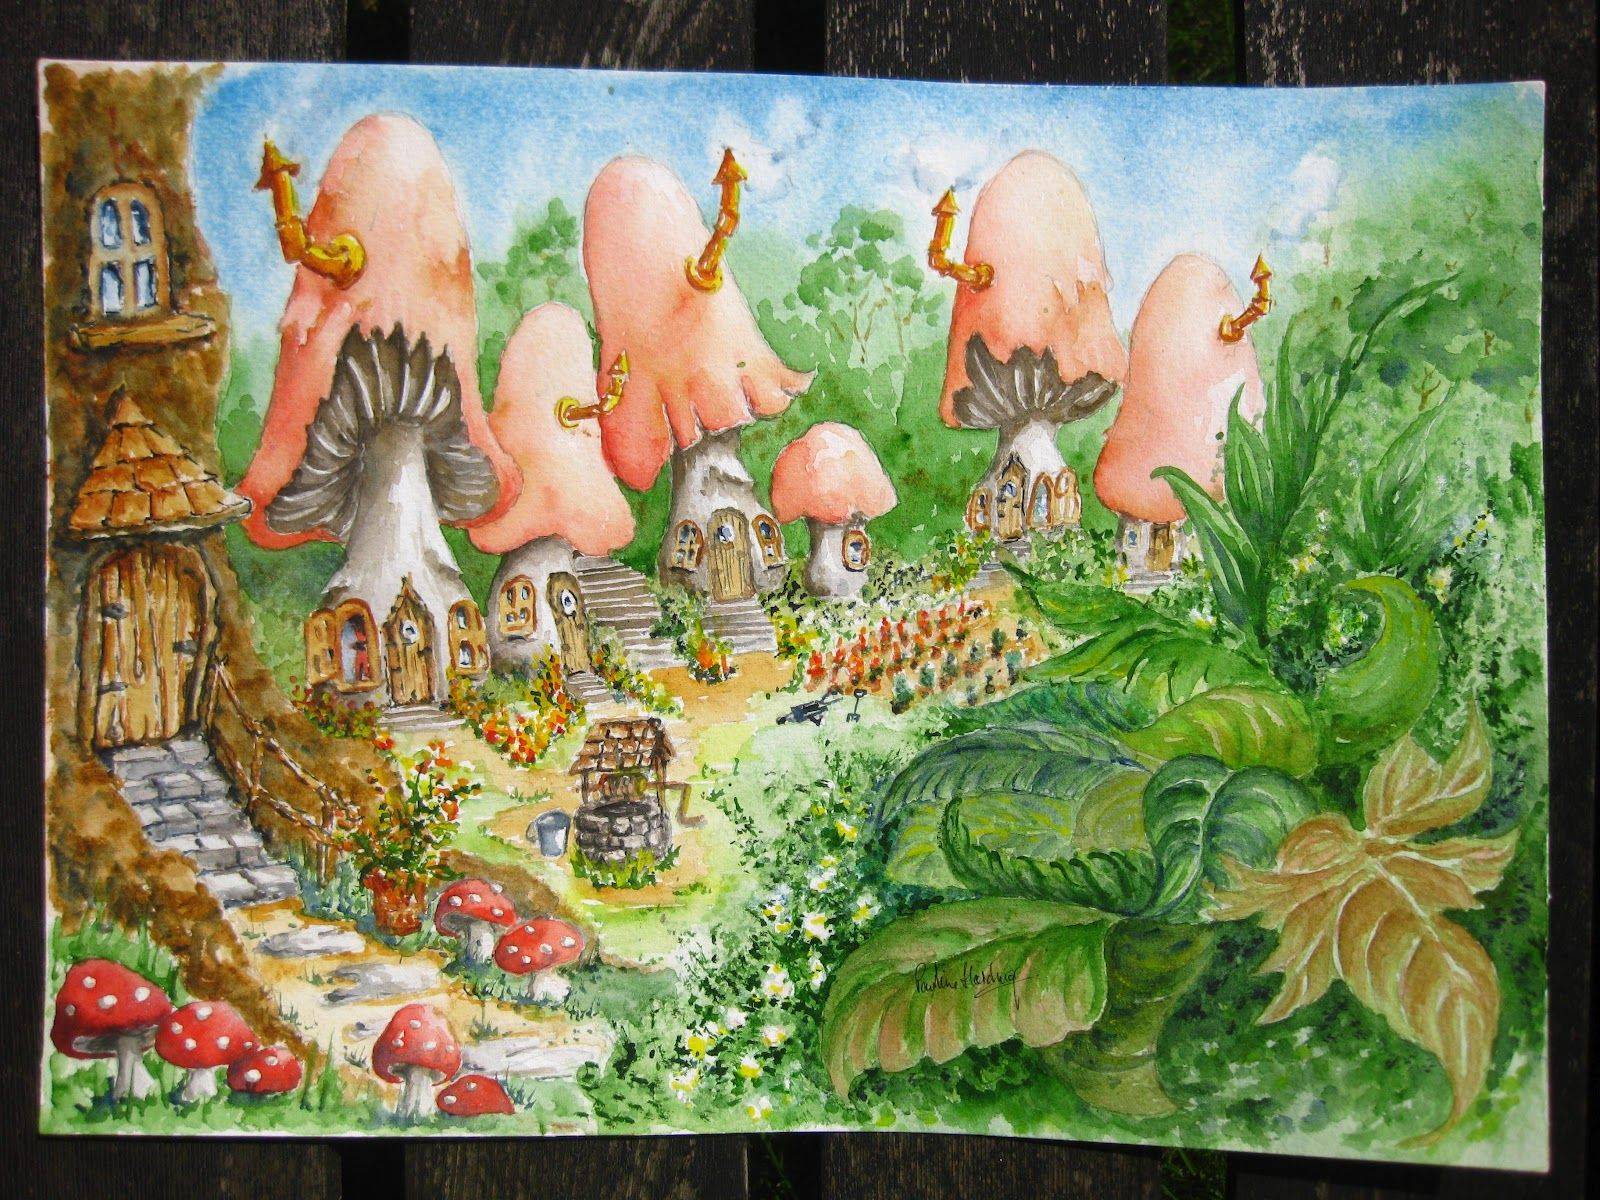 The Fairy Garden Painting Selling Paintings Painting Gallery